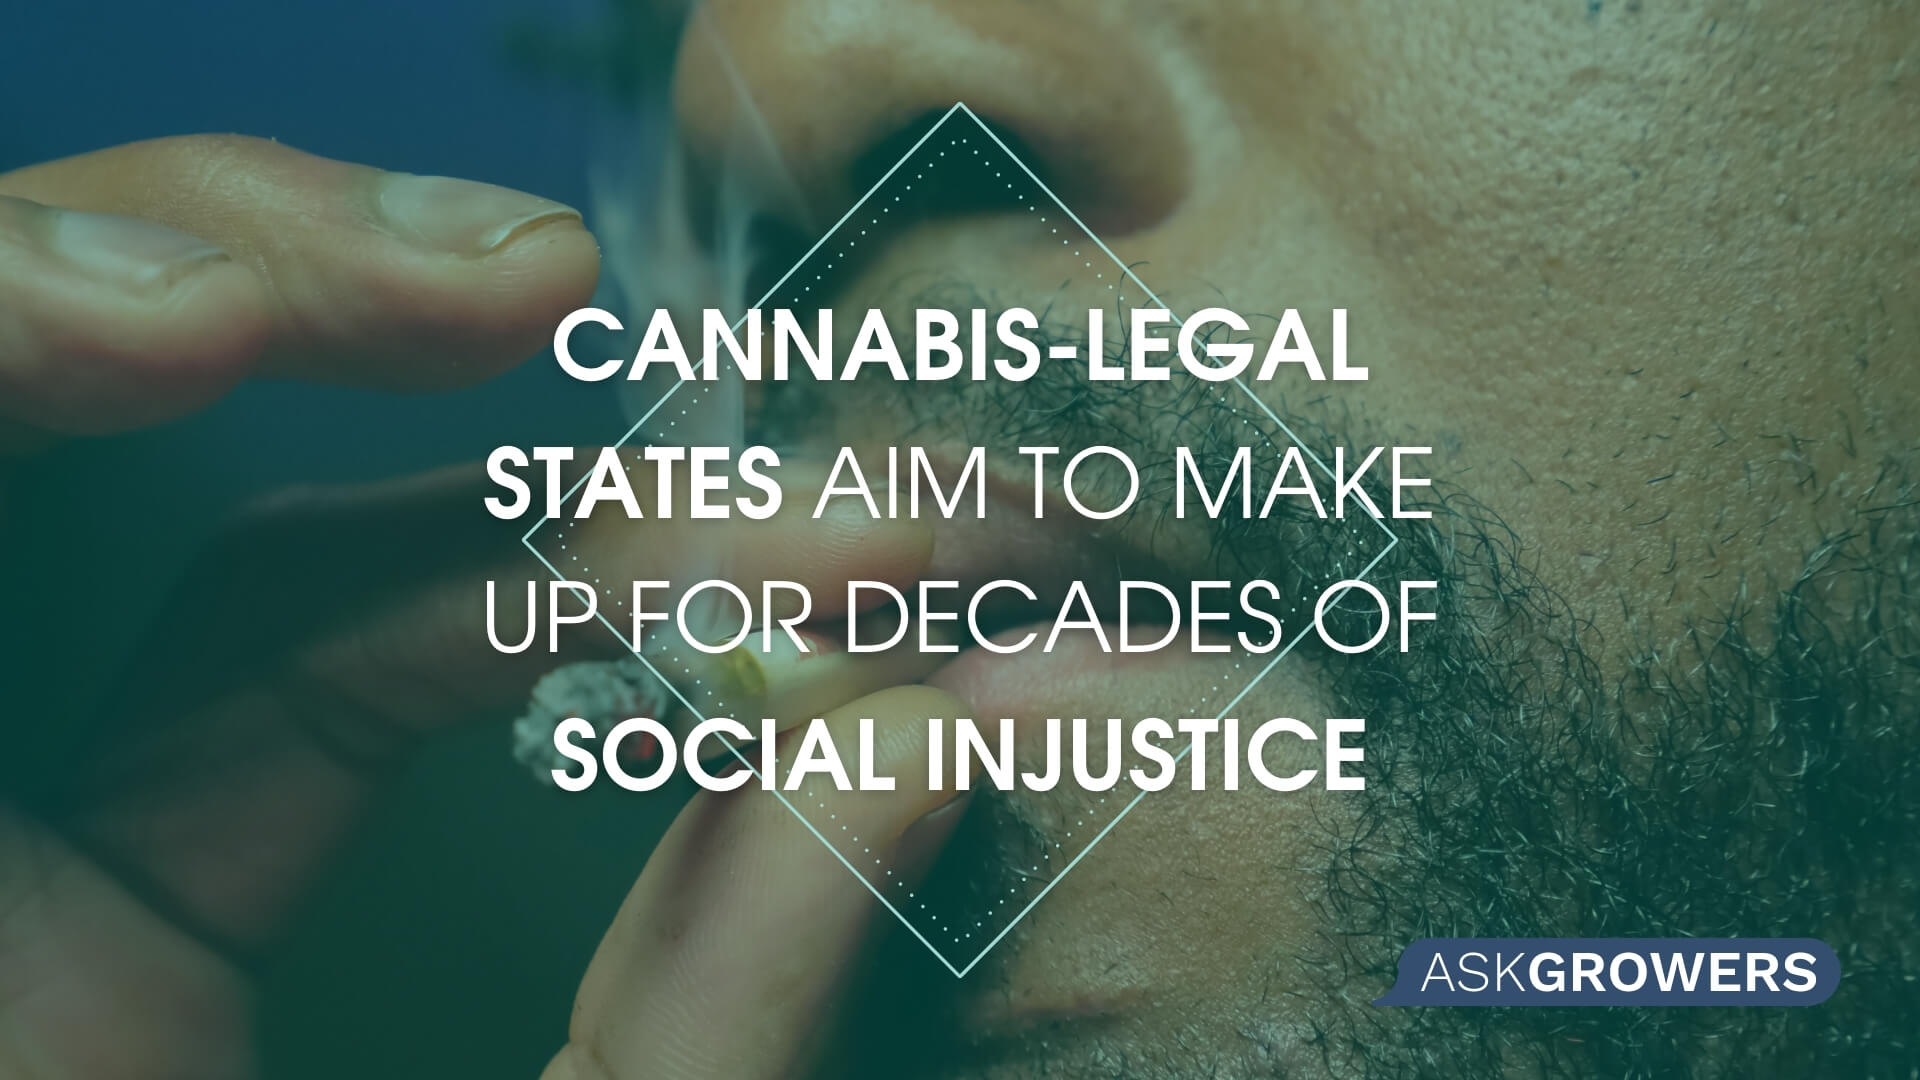 Cannabis-Legal States Aim to Make Up for Decades of Social Injustice